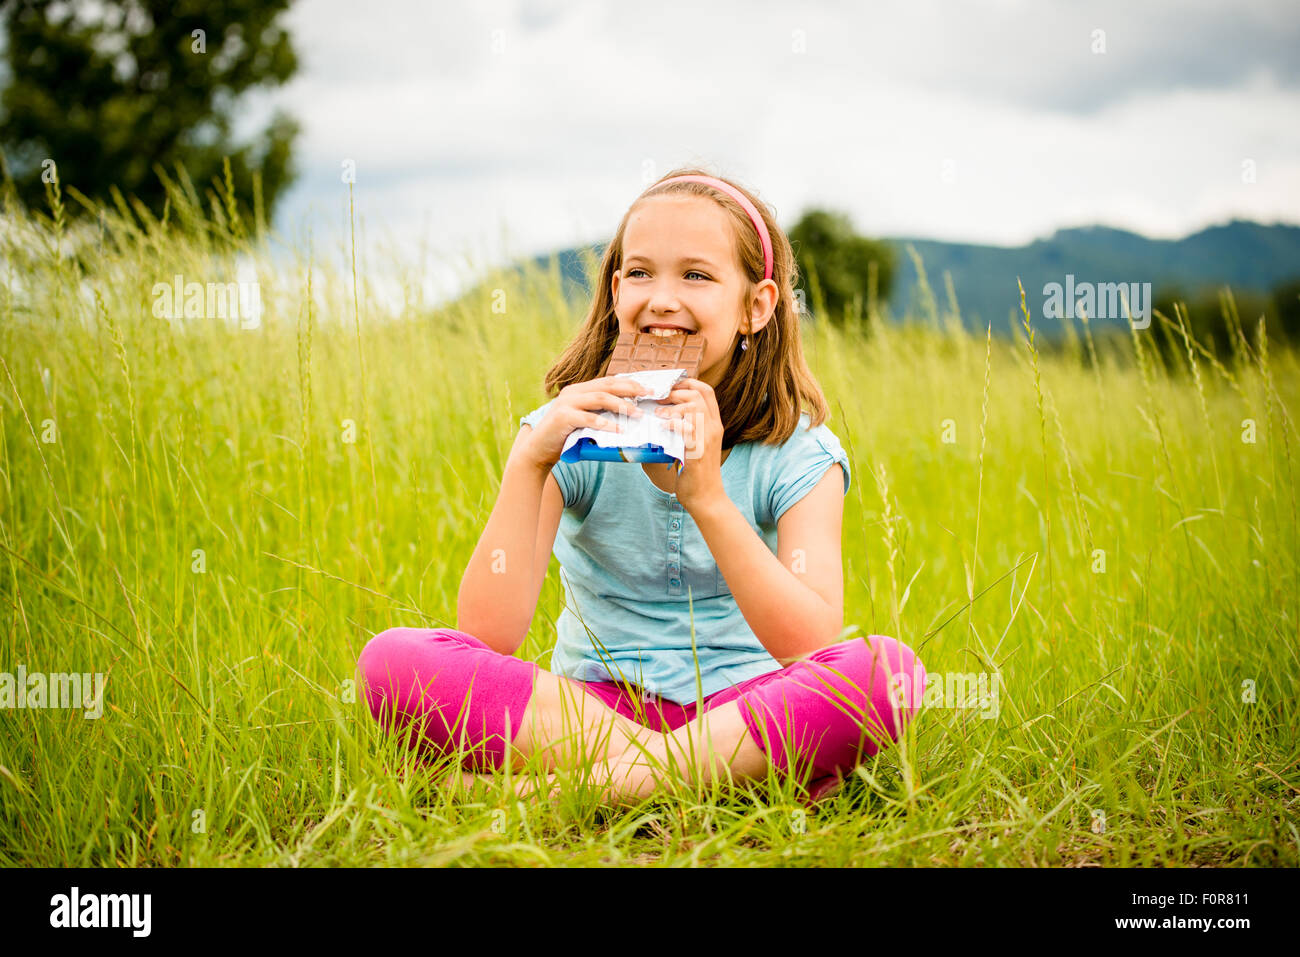 Child eating and relishing chocolate - outdoor in nature Stock Photo